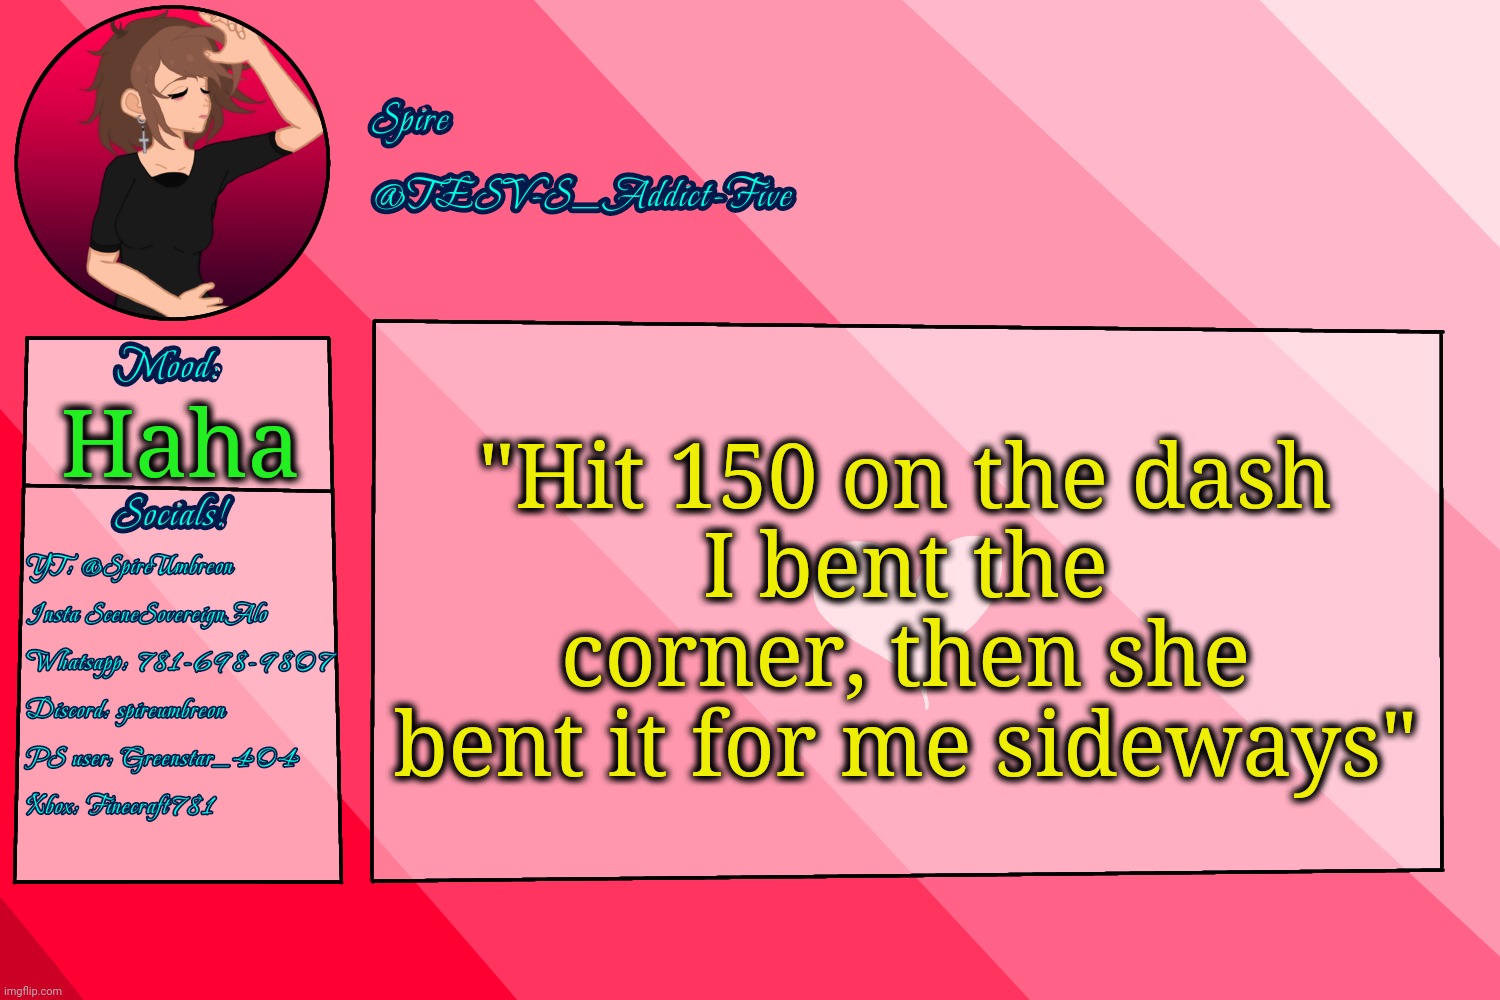 . | "Hit 150 on the dash
I bent the corner, then she bent it for me sideways"; Haha | image tagged in tesv-s_addict-five announcement template | made w/ Imgflip meme maker